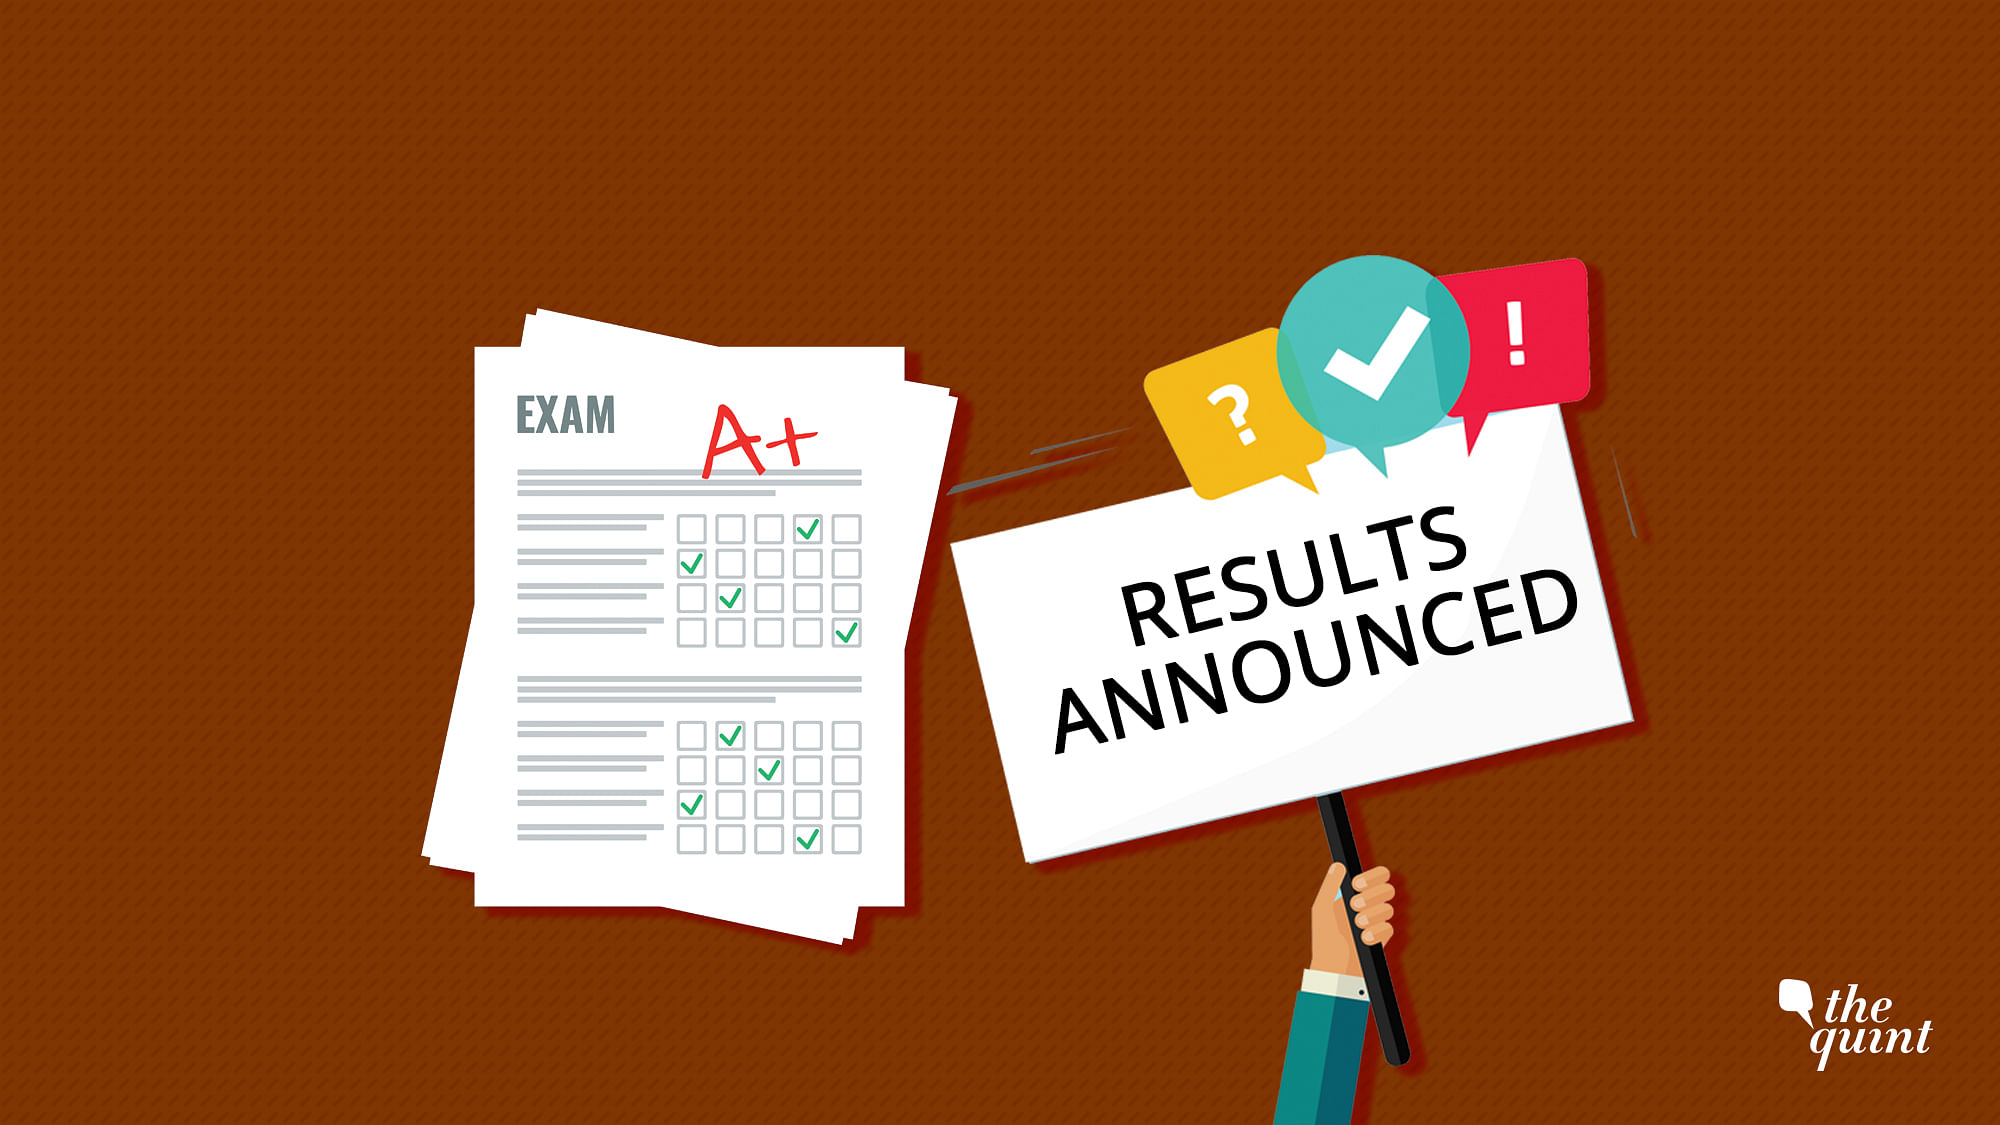 Kerala SSLC Results 2019: Kerala Secondary School Leaving Certificate (SSLC) or Class 10 state board exams were conducted in the month of March from 13 to 28.